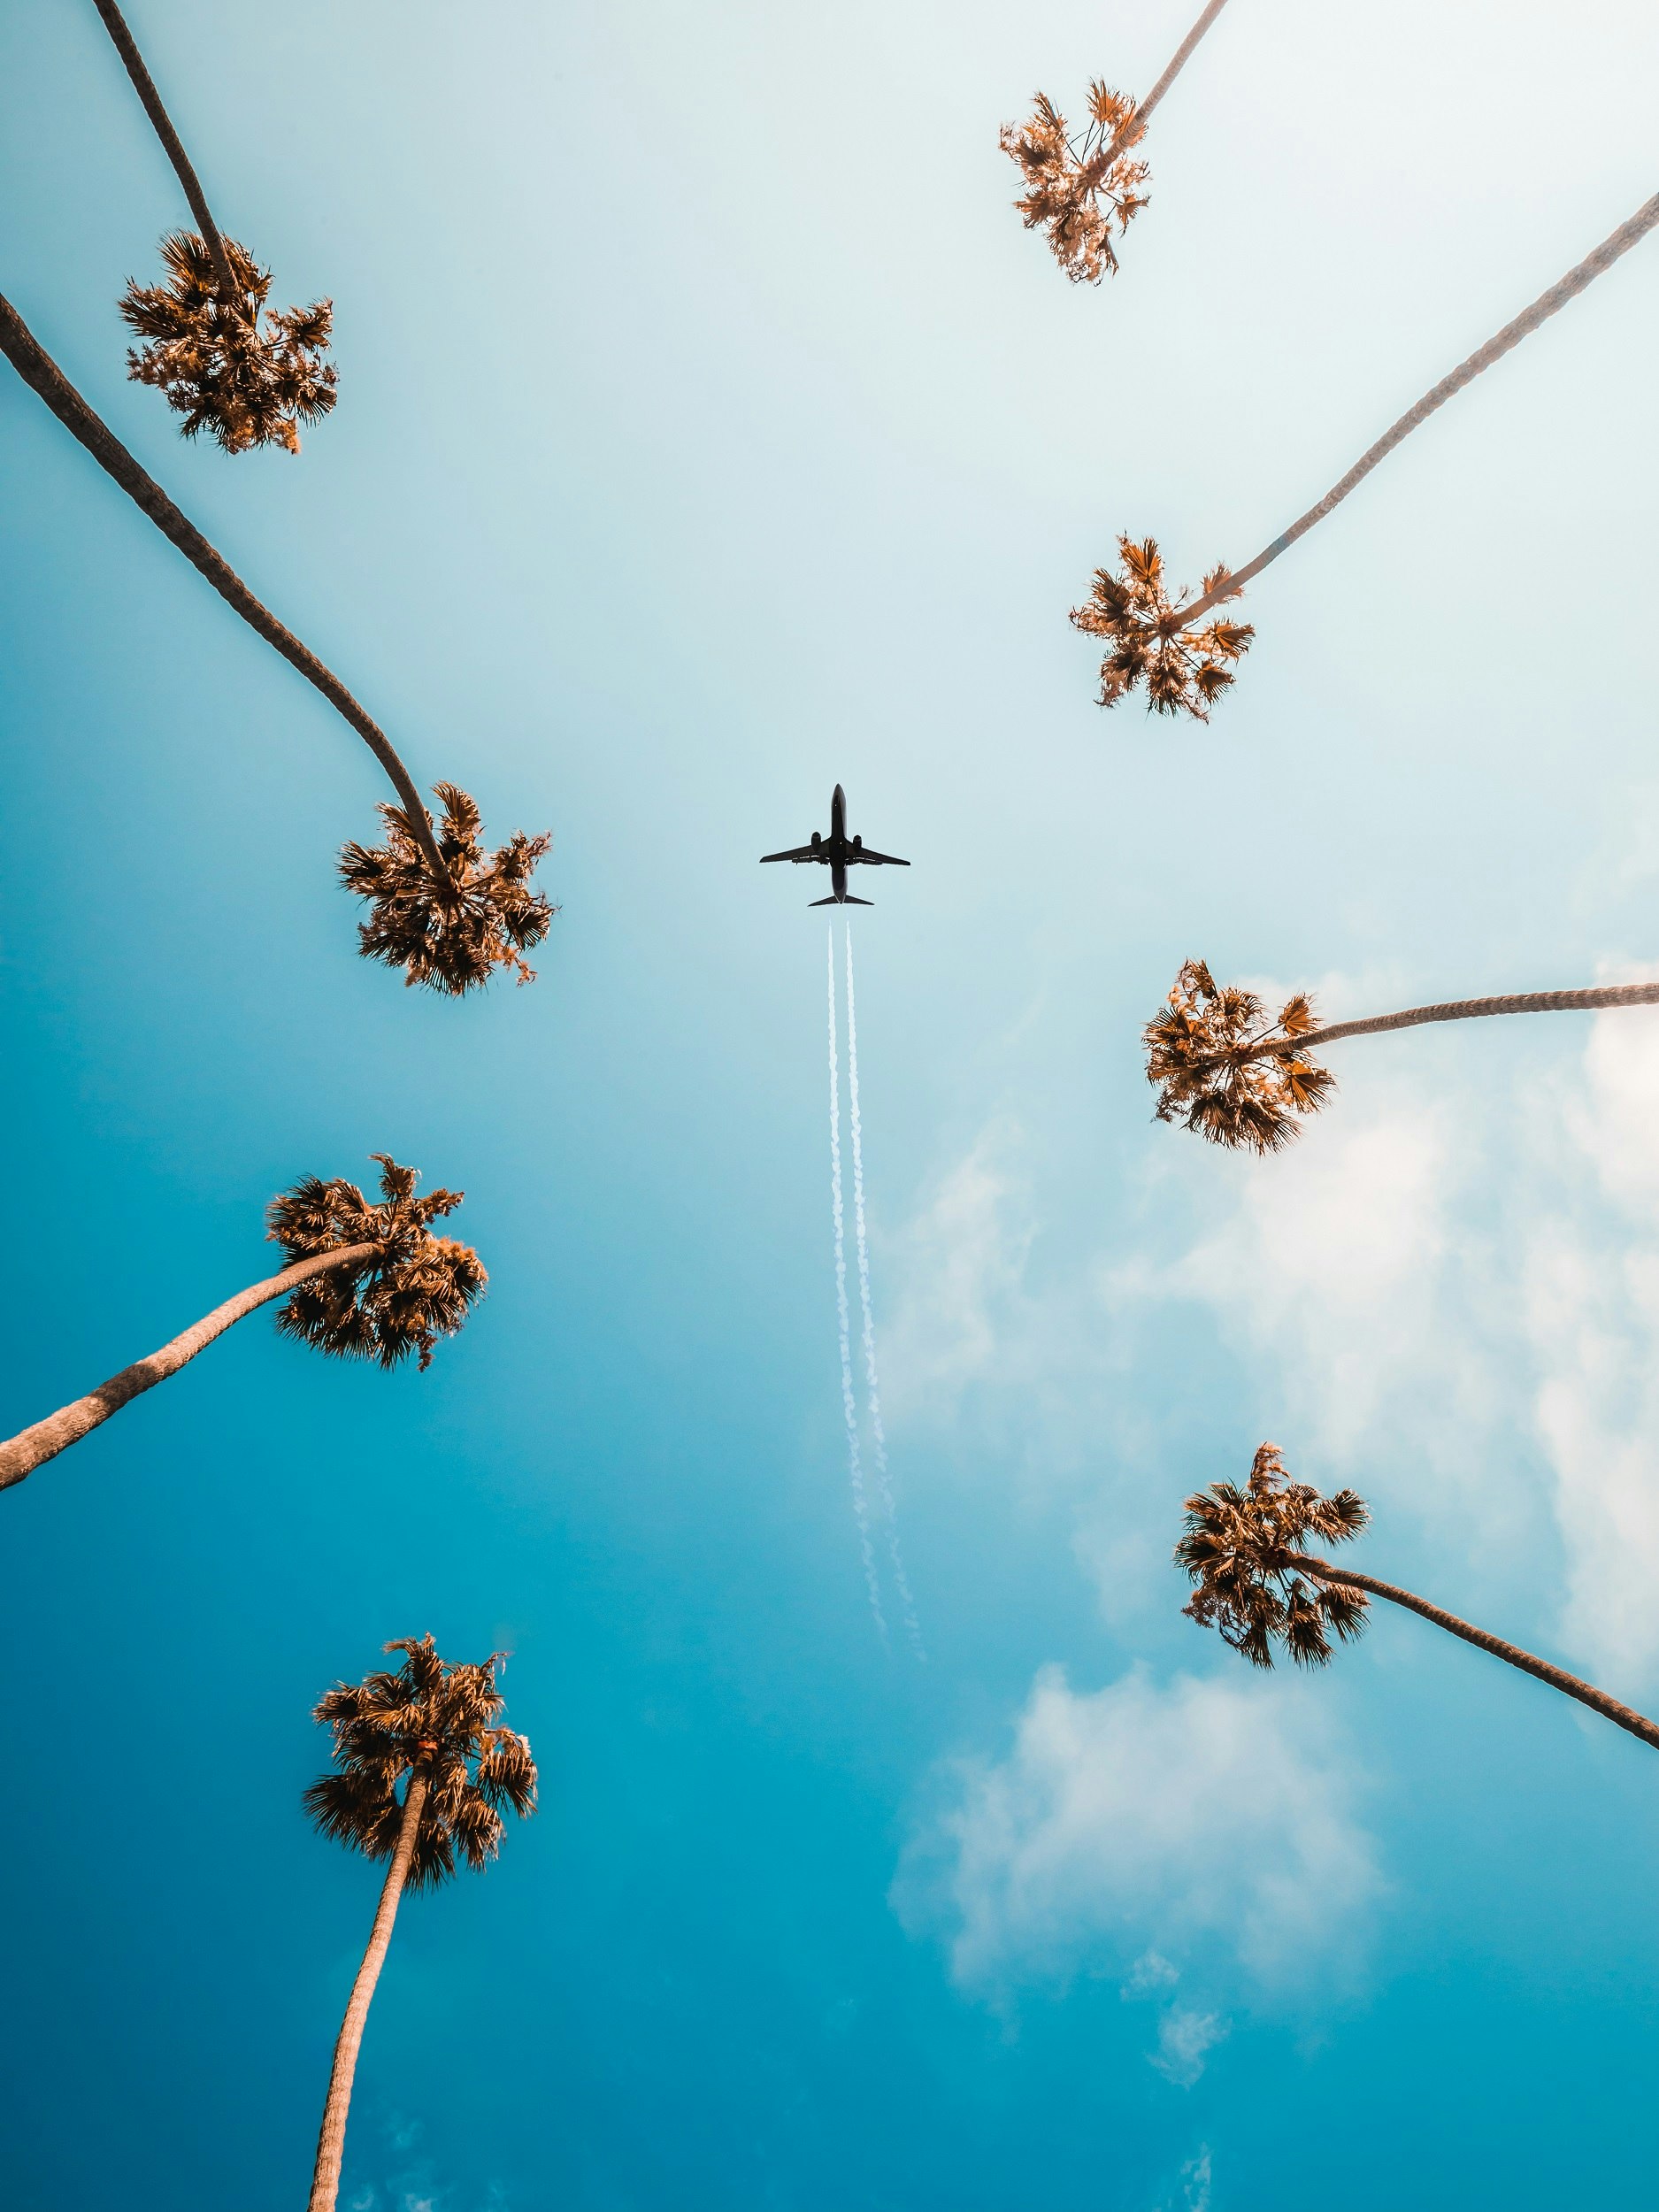 An upwards shot to a blue sky and palm trees, with an aircraft high above